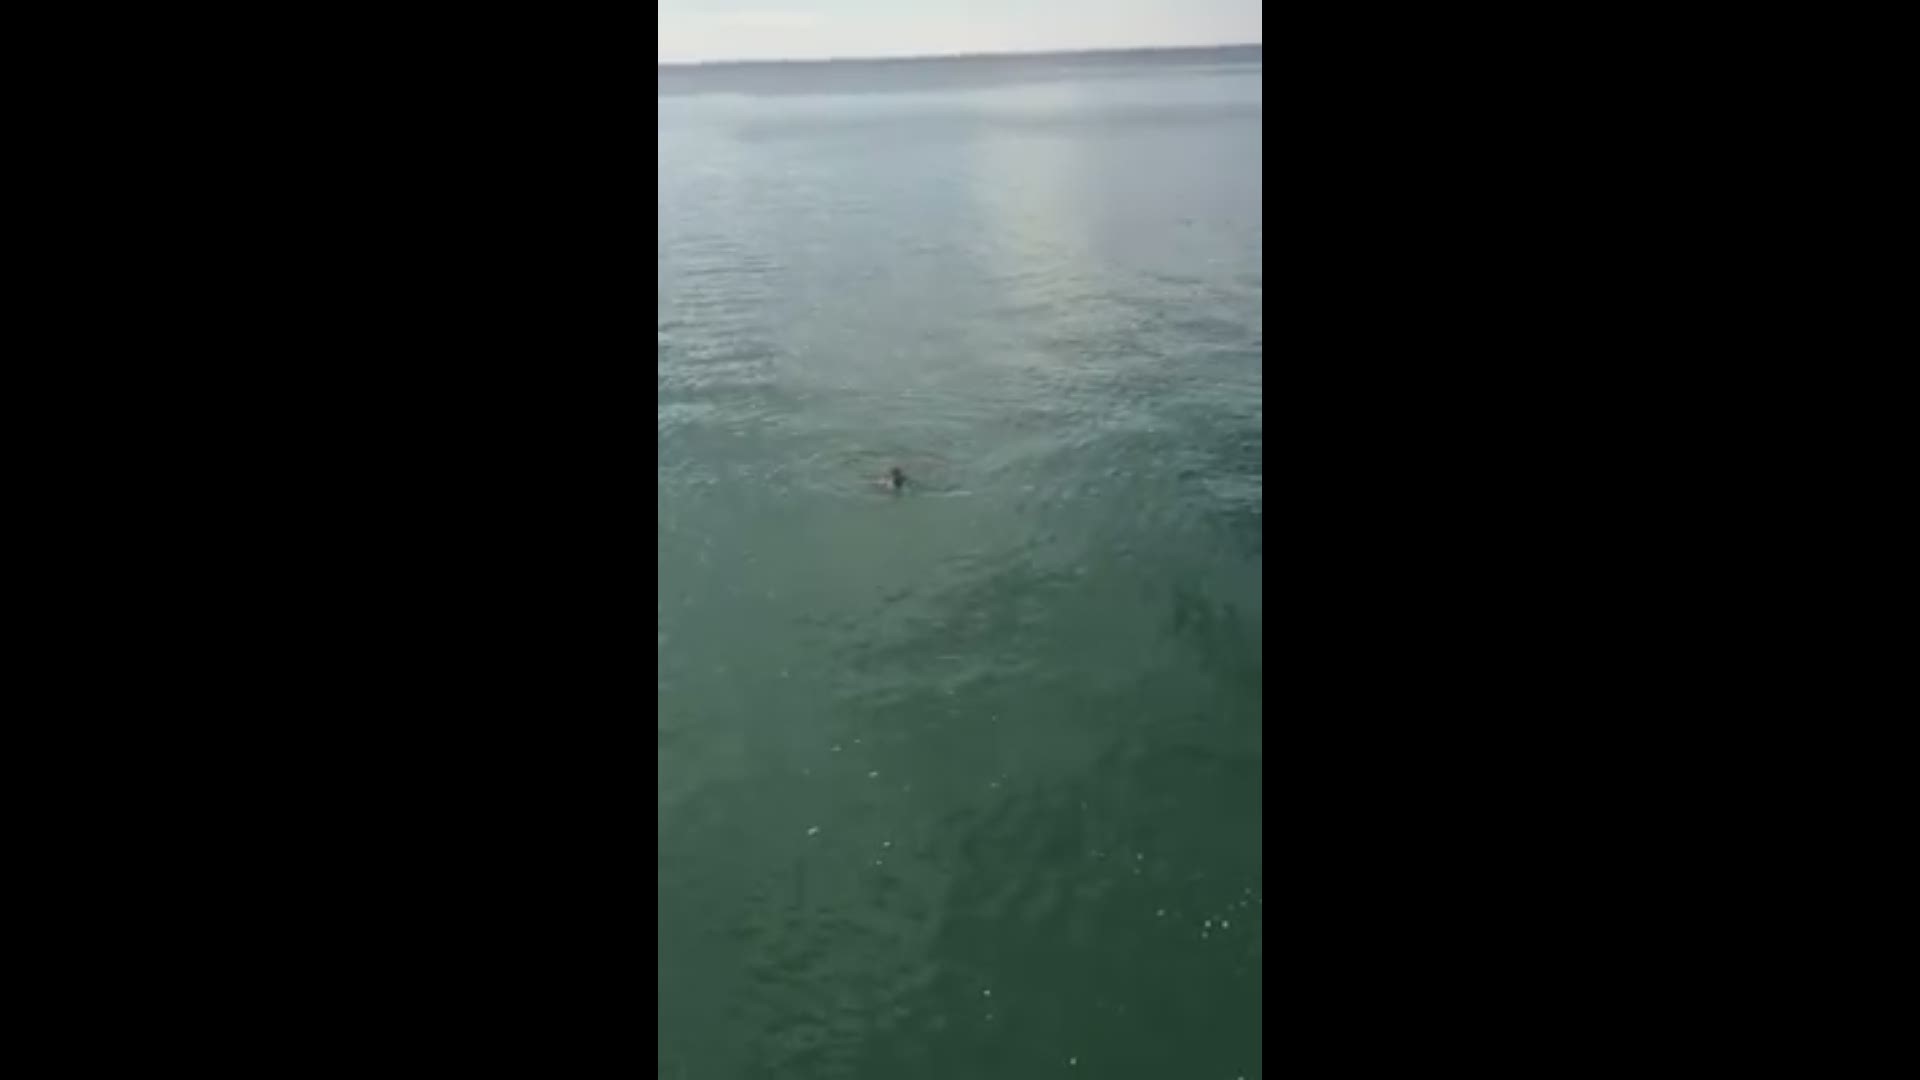 Austin Selby was on a Venice pier when he saw the turtle in trouble